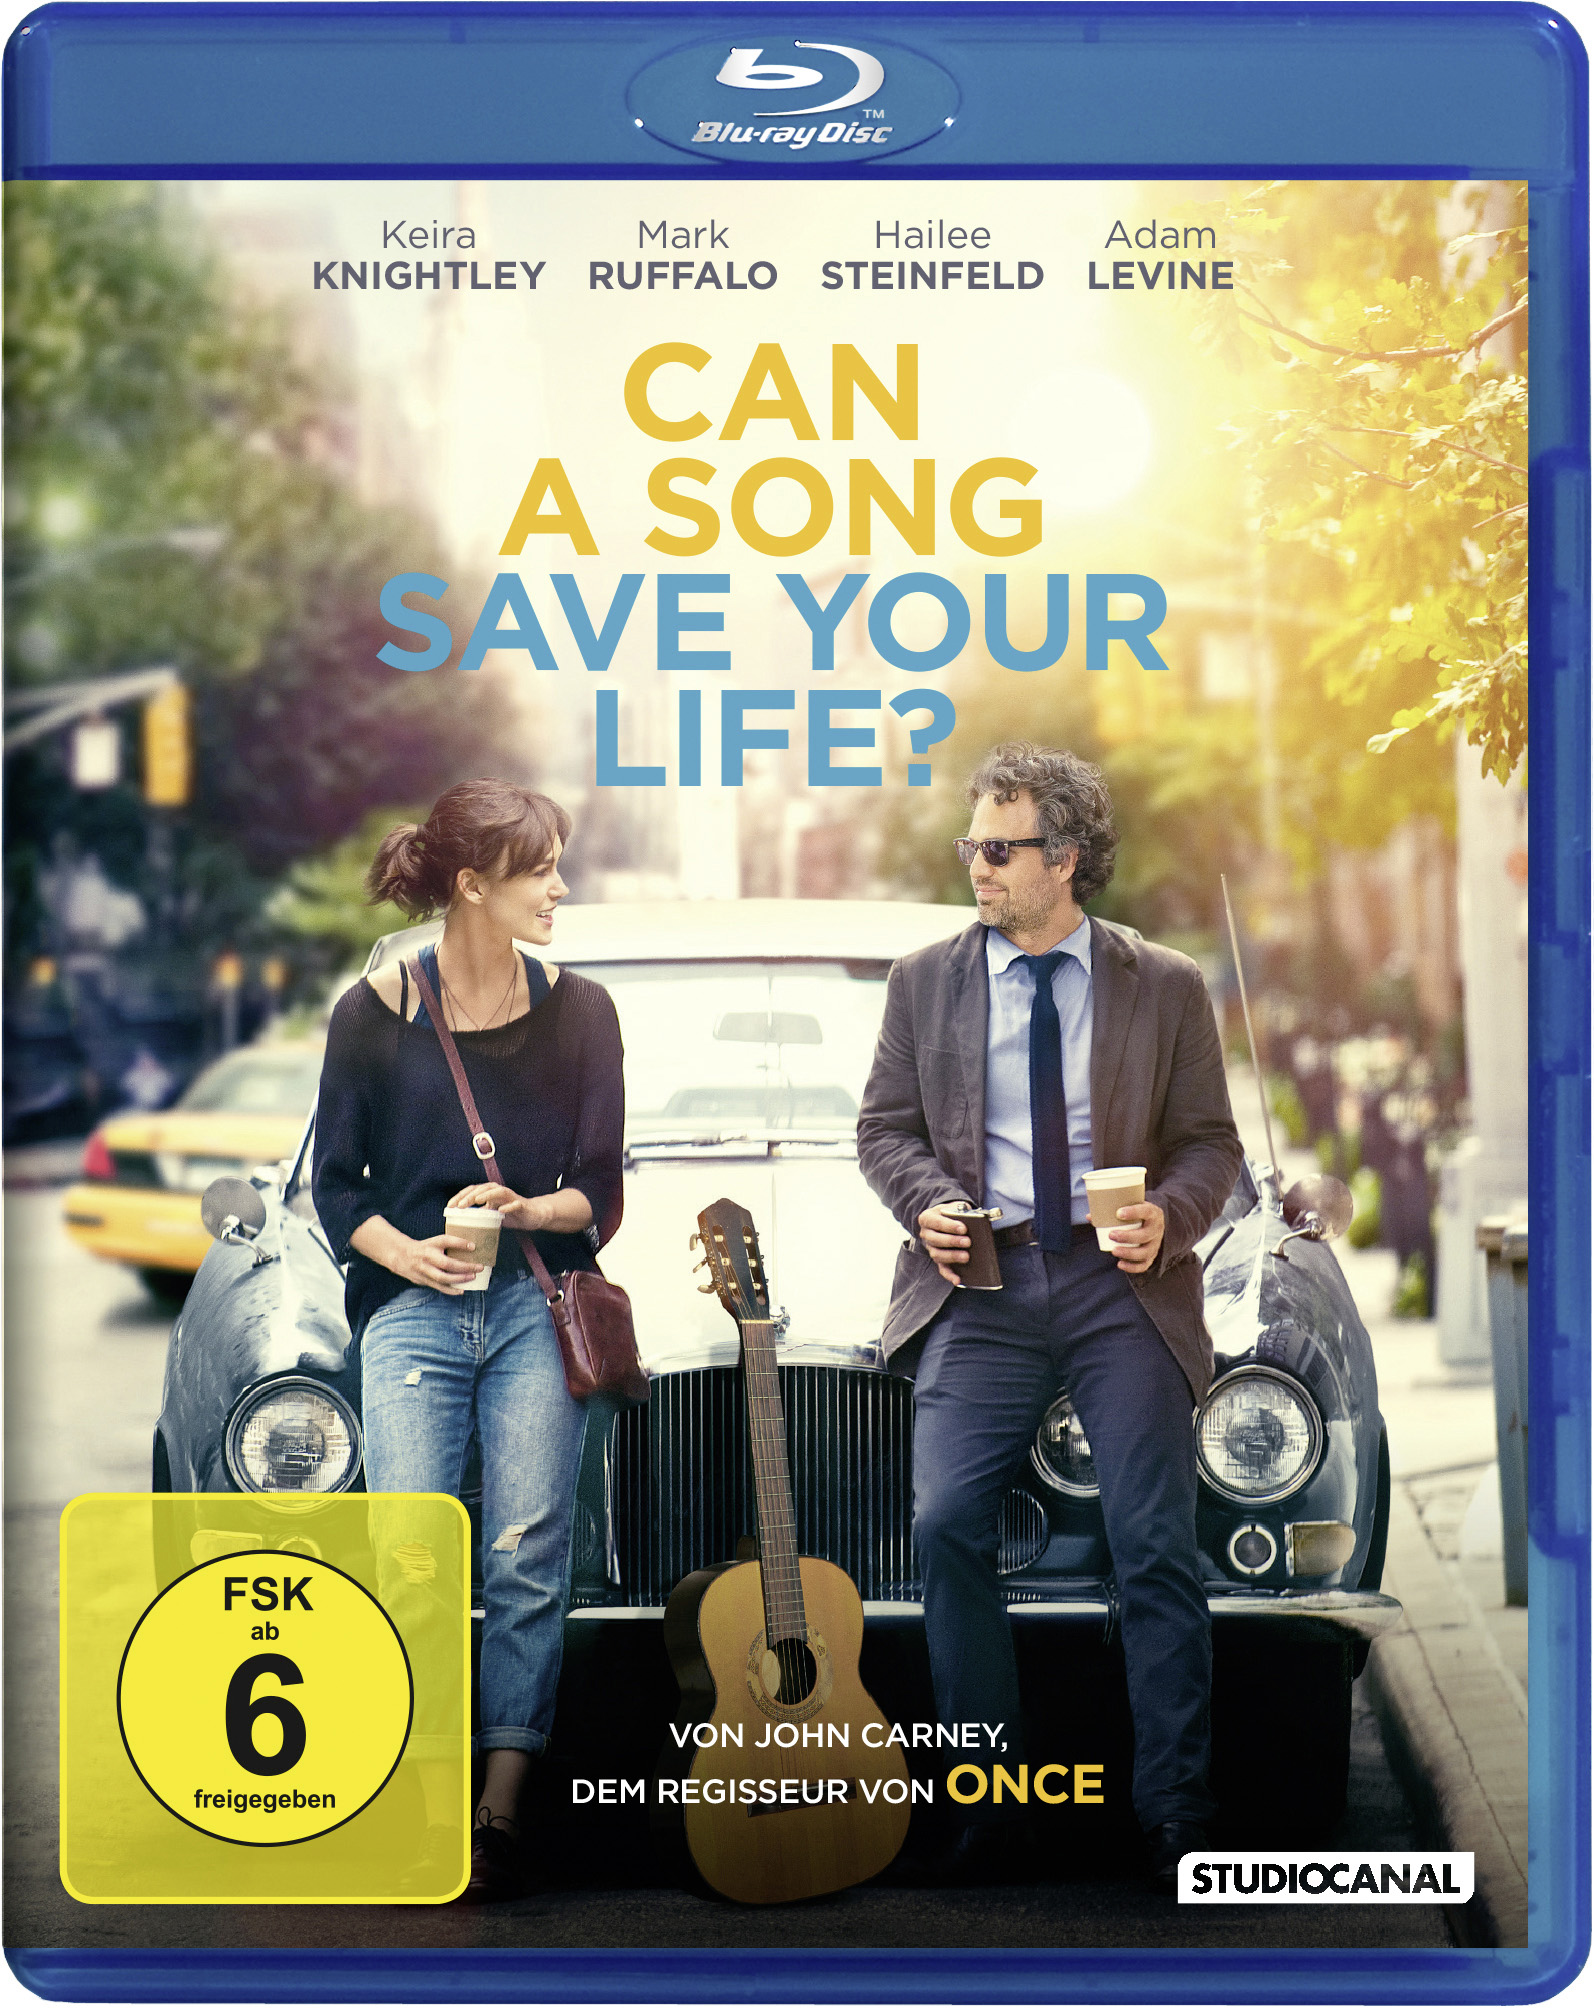 Blu-ray Song A Your Can Life? Save